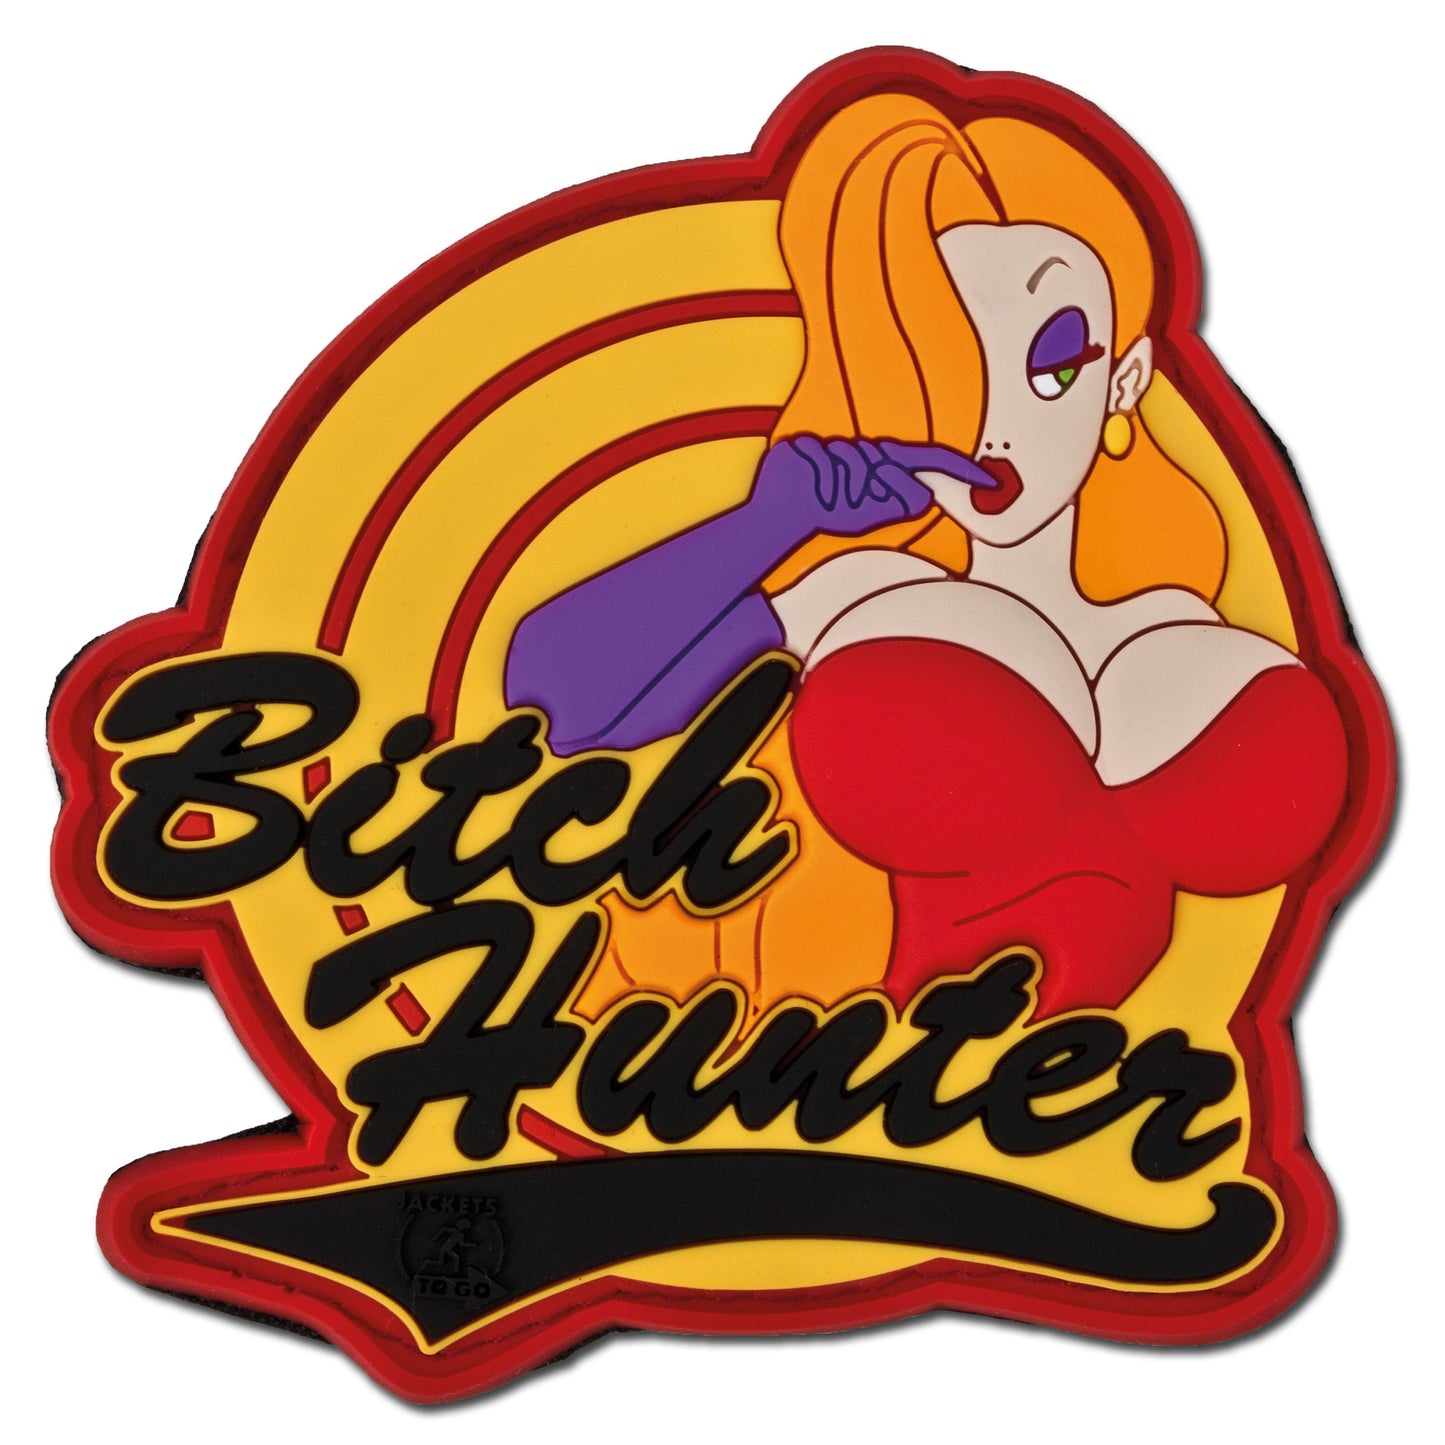 3D Bitch Hunter PVC Patch, Velcro backed Badge. Great for attaching to your field gear, jackets, shirts, pants, jeans, hats or even create your own patch board.  Size: 7.8x7.66cm